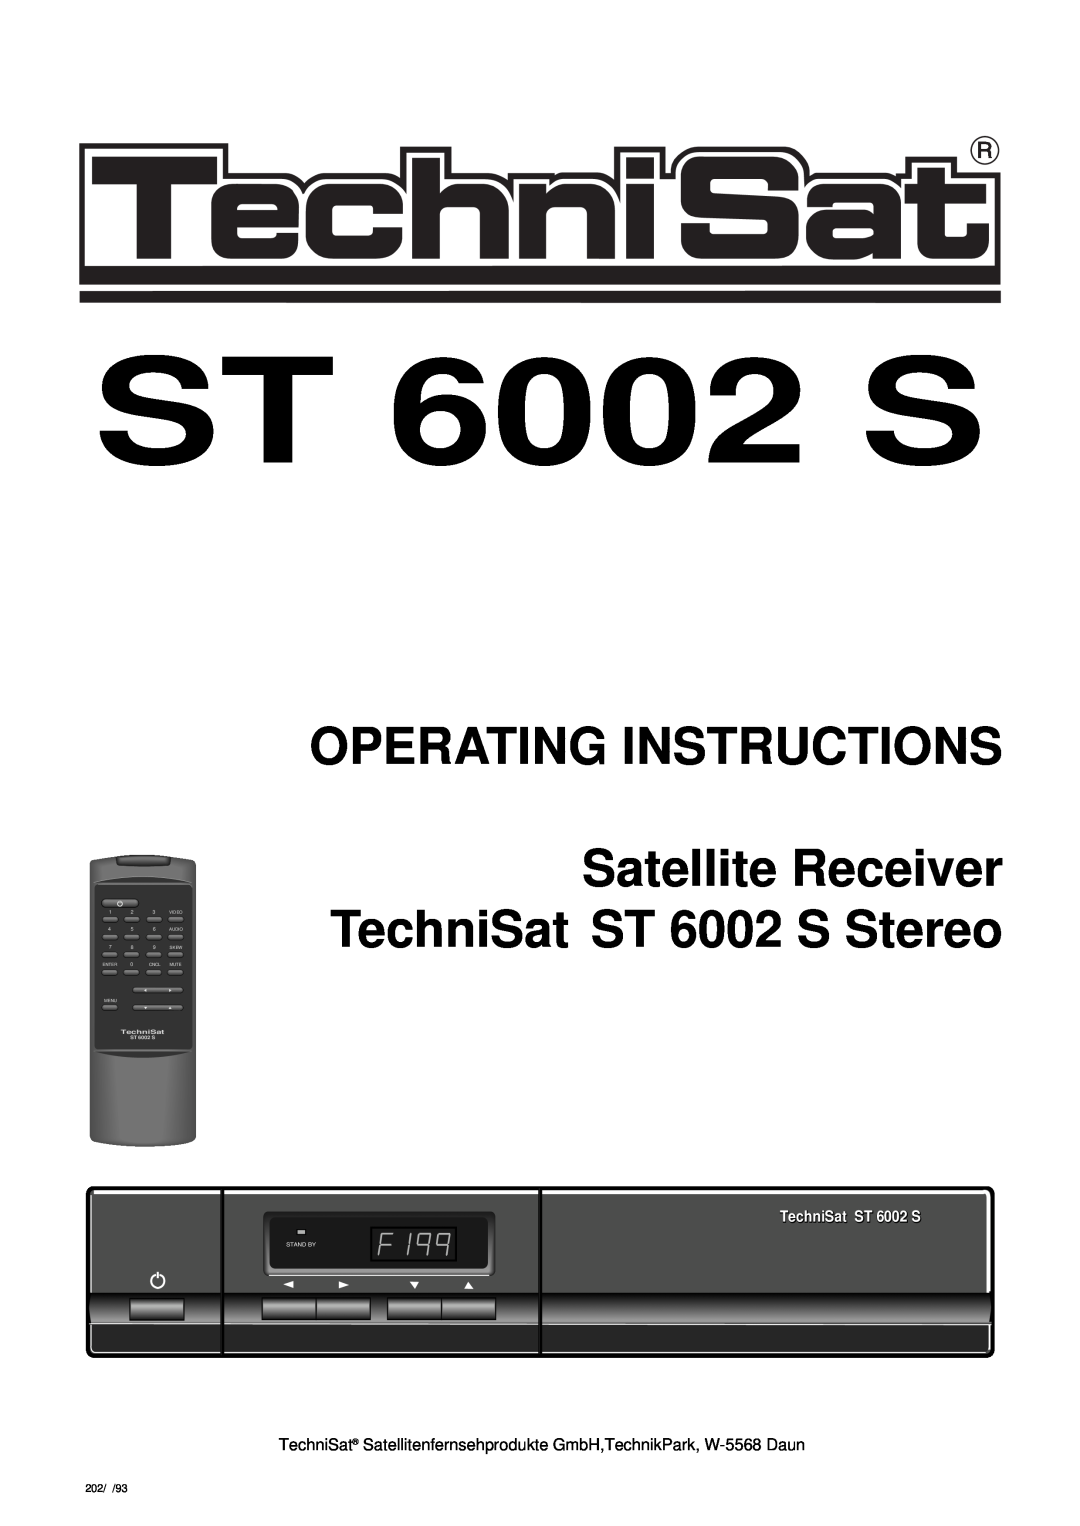 TechniSat manual Operating Instructions, Satellite Receiver TechniSat ST 6002 S Stereo, 202/ /93, Stand By 